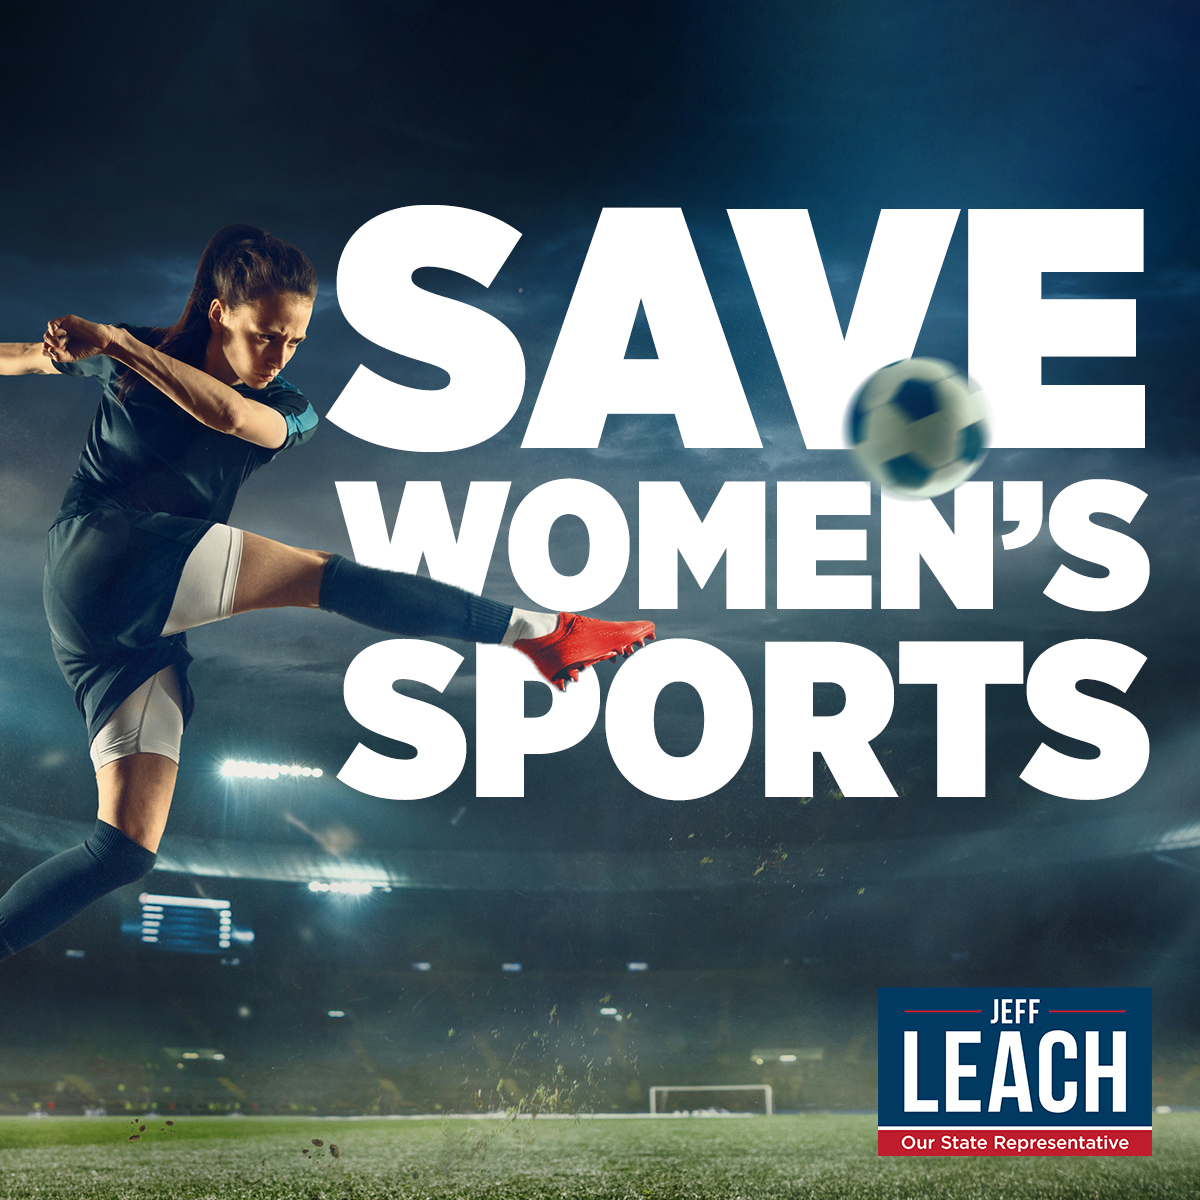 Save Women’s Sports Act Passes!